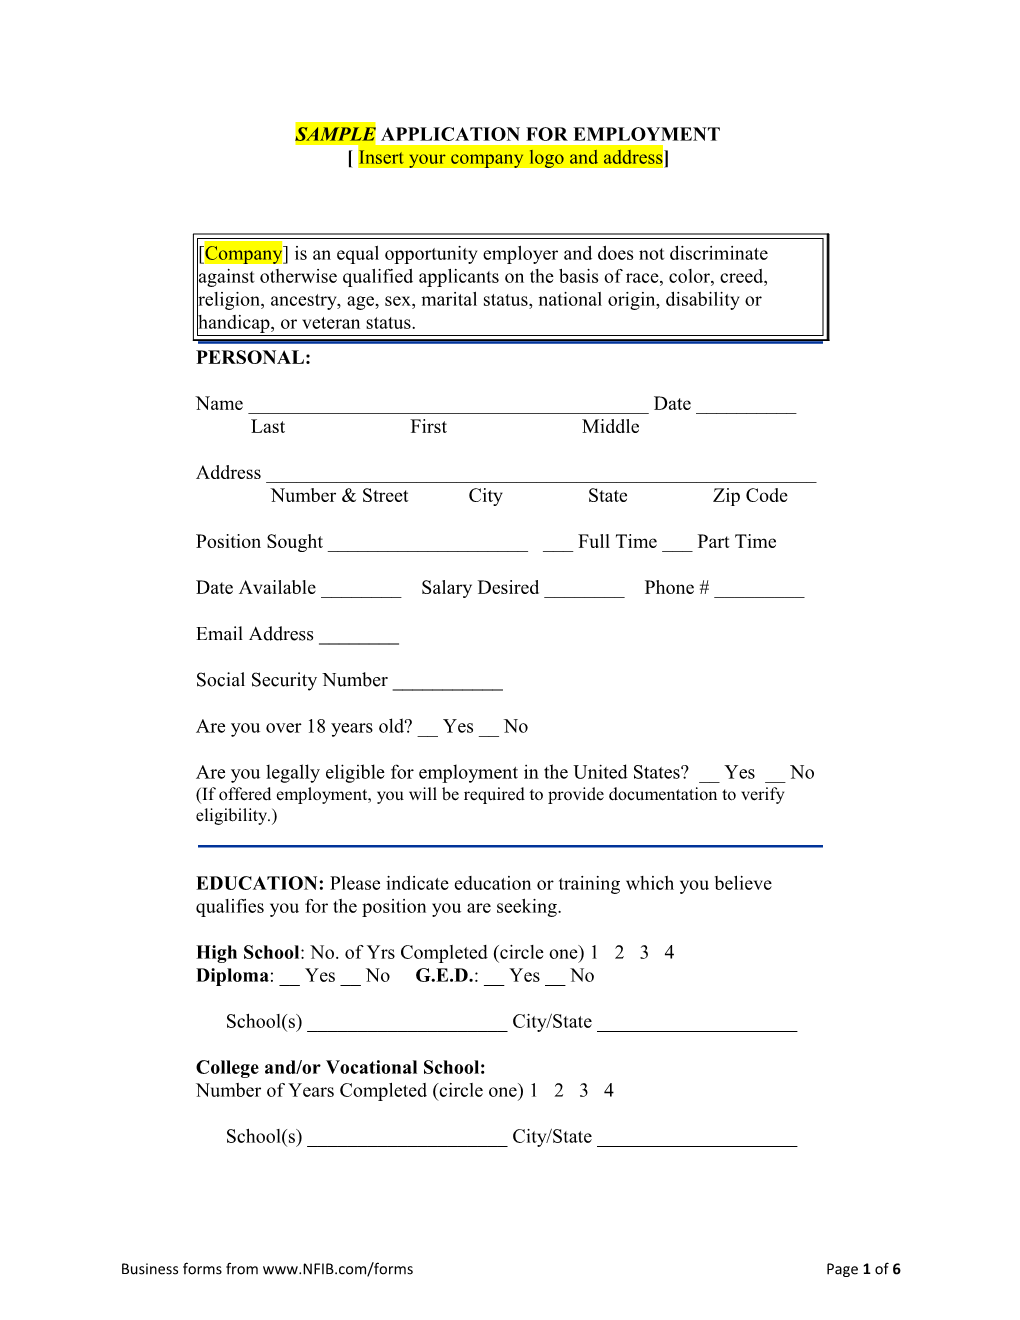 Business Forms from Page 1 of 6